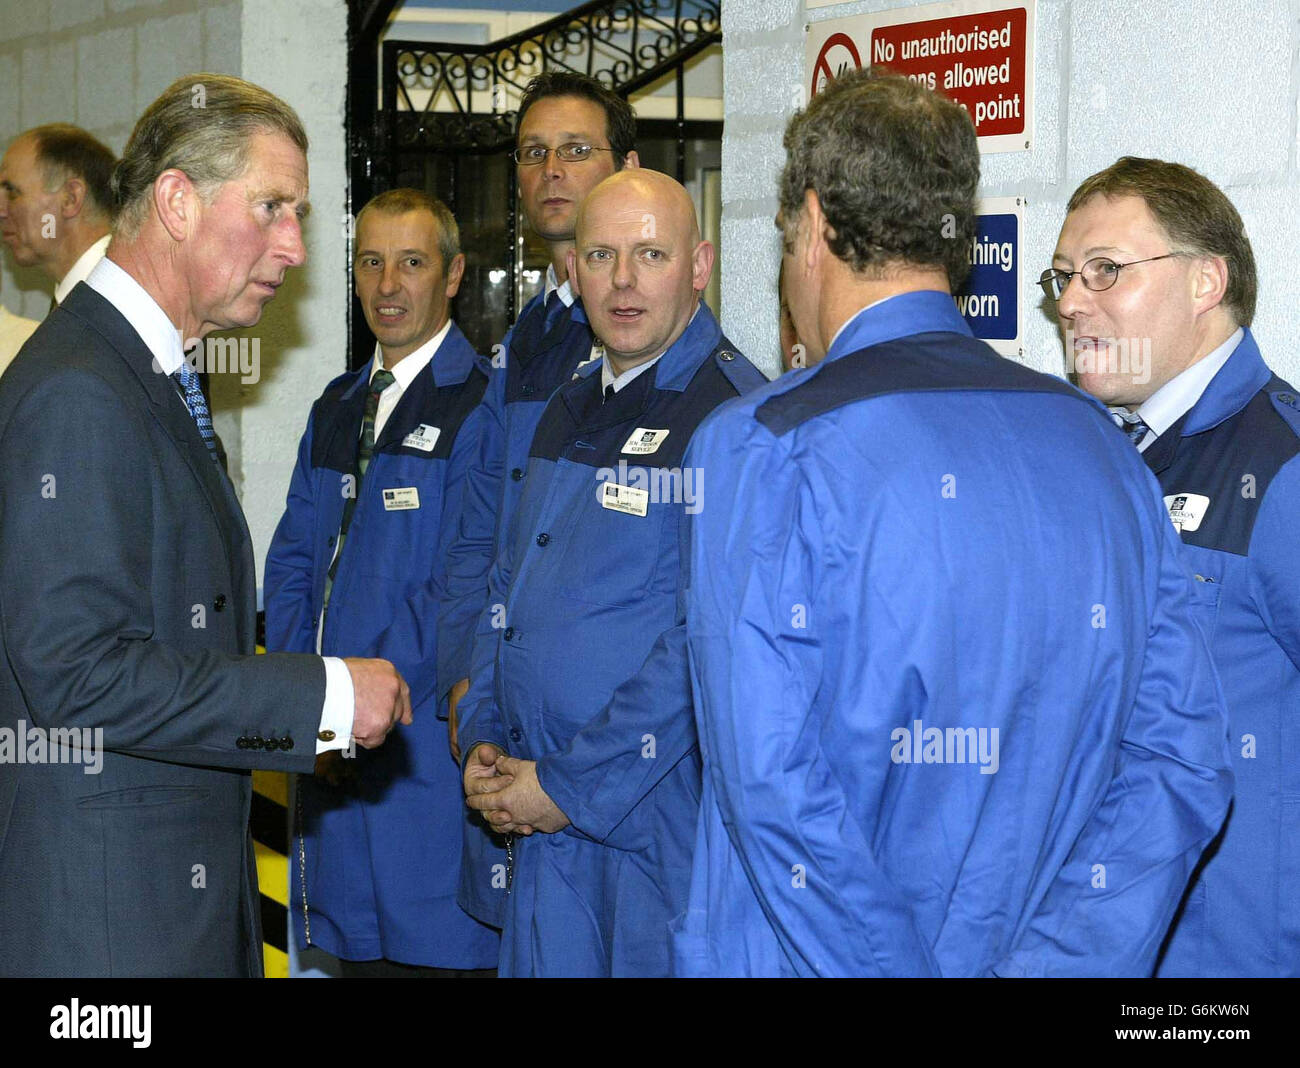 The Prince of Wales talks with prison staff, during his visit to HM Prison Wymott in Lancashire. Stock Photo